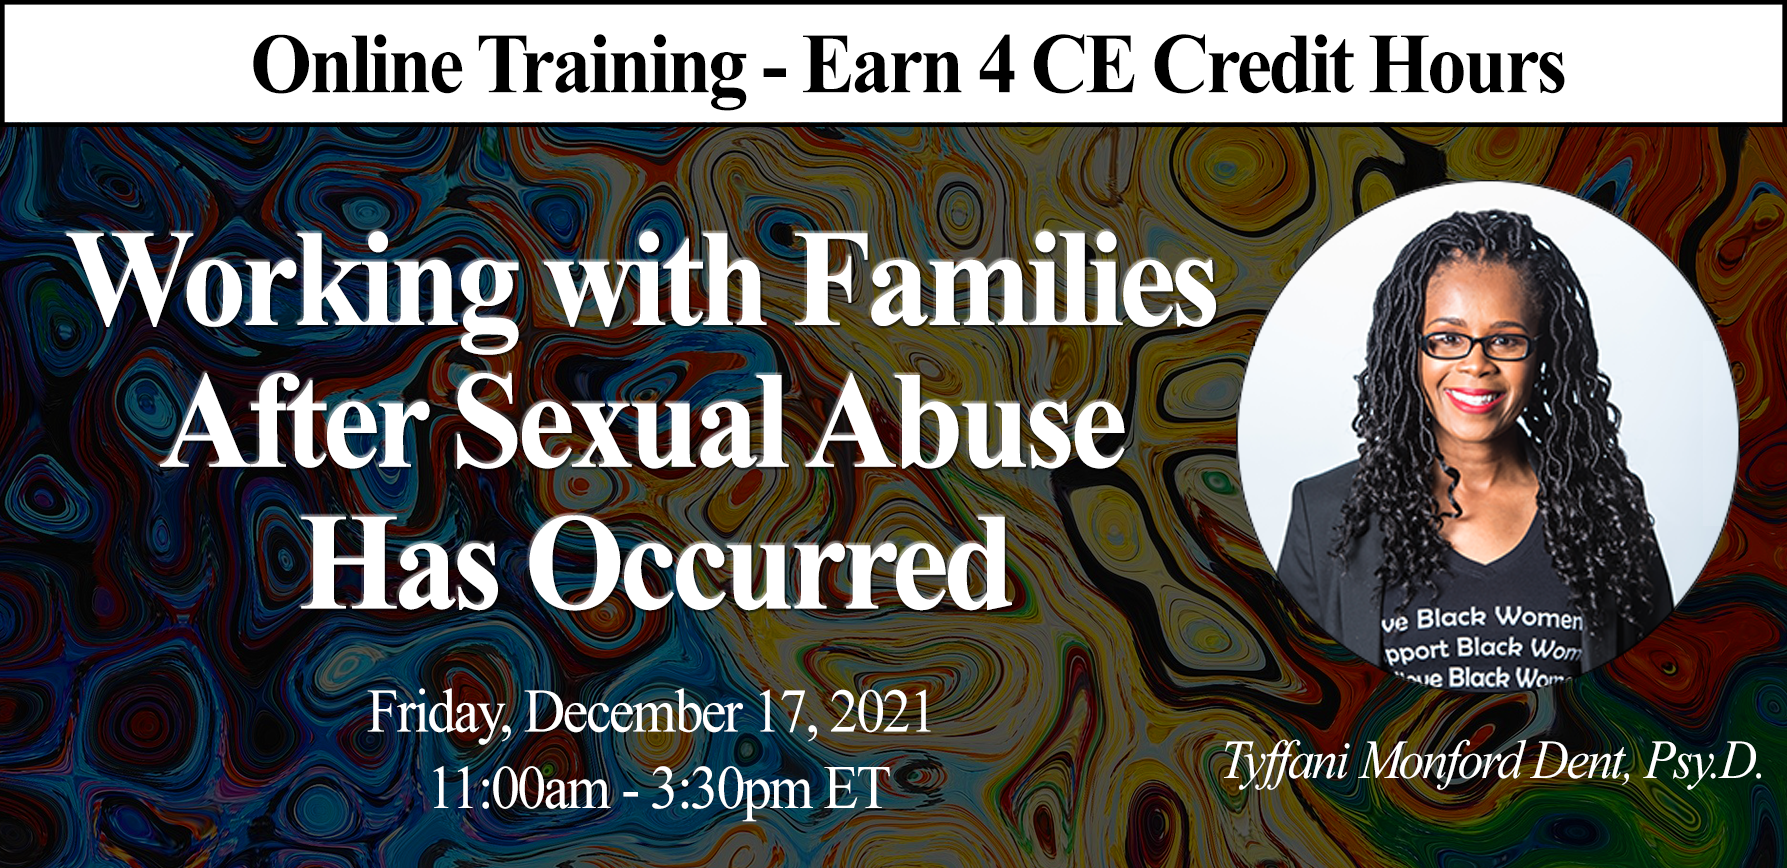 Online Training: Working with Families After Sexual Abuse Has Occurred